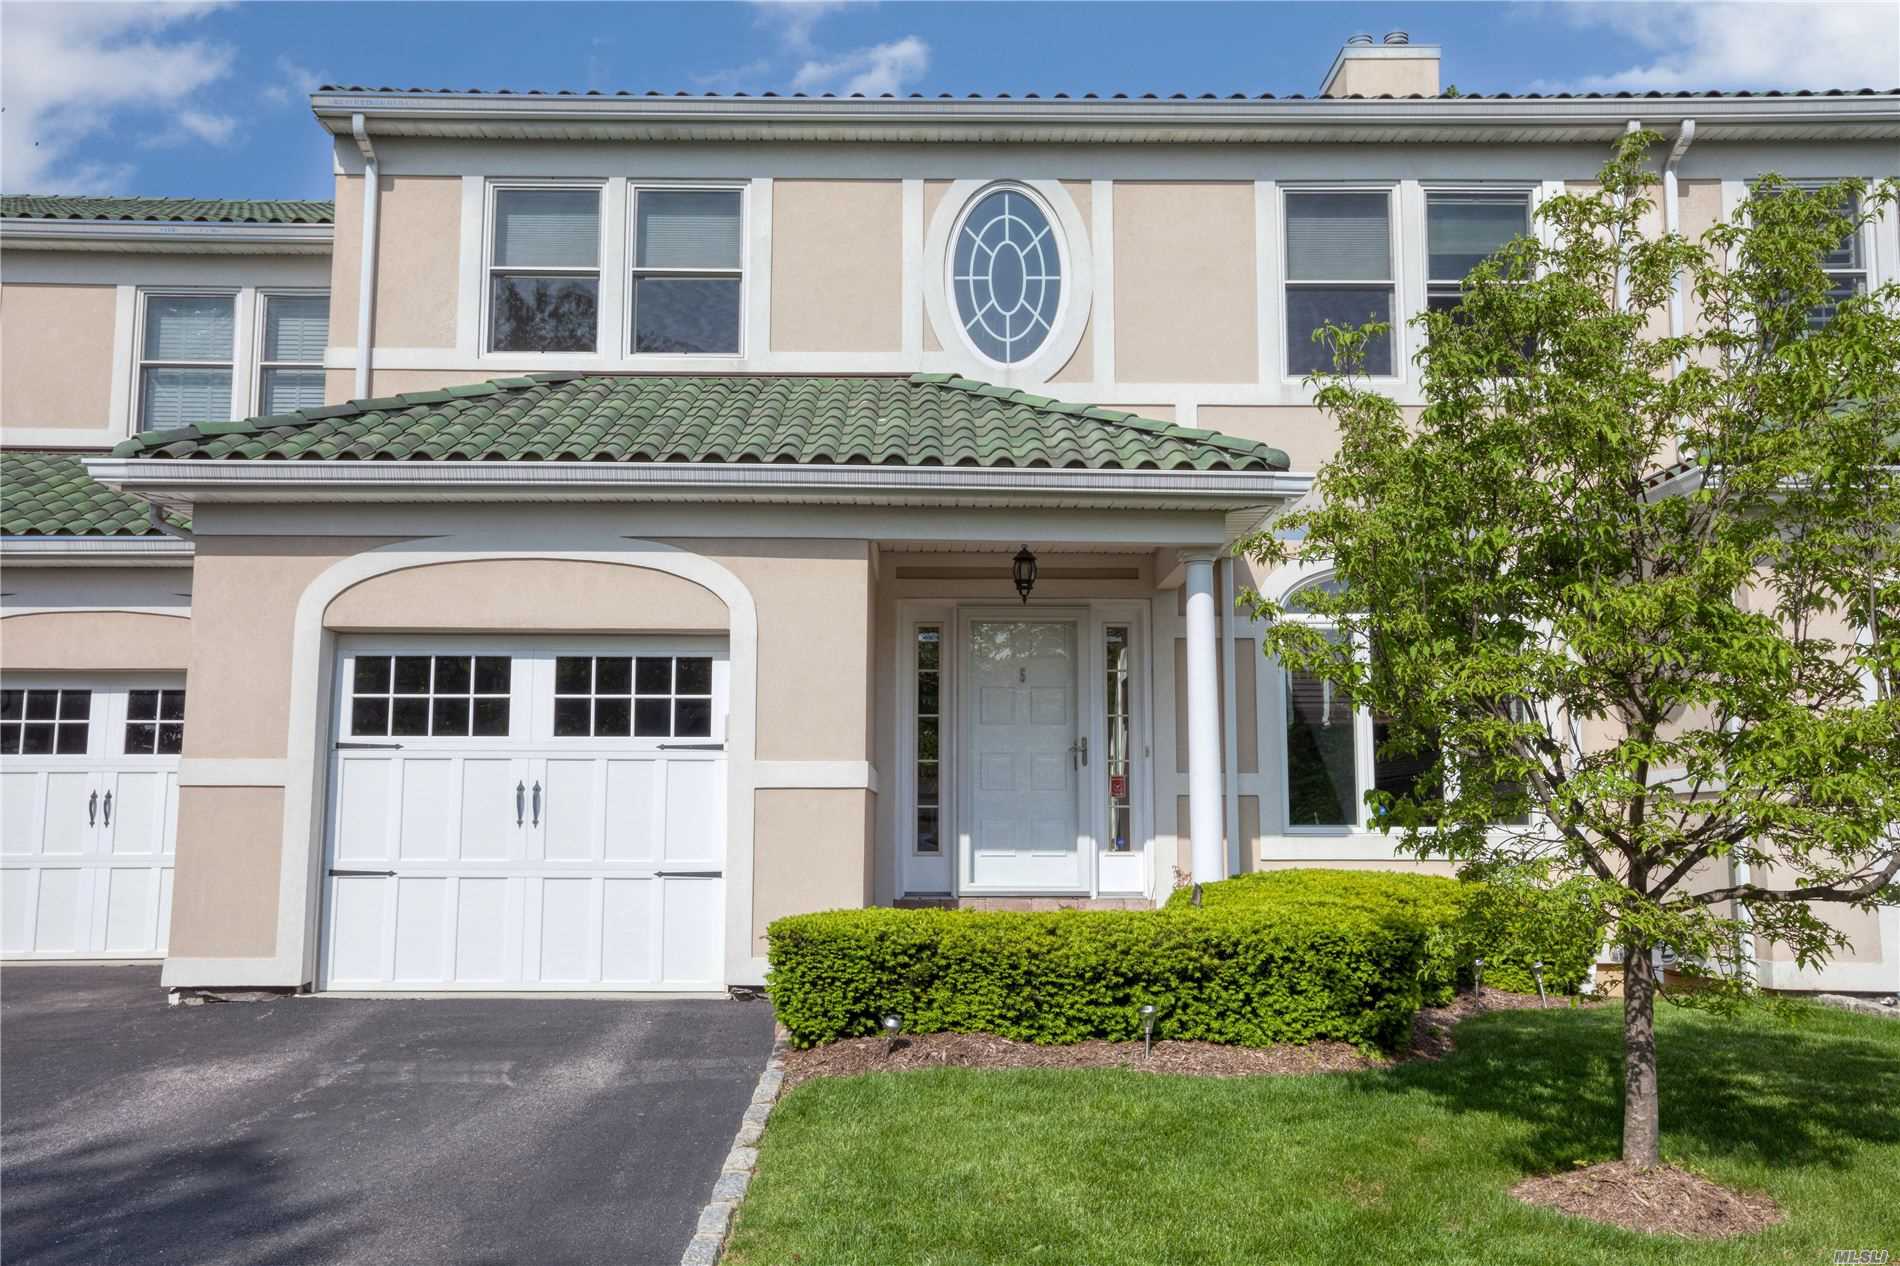 Beautiful Unit in a Gated Community in the Heart of Bay Shore, 10 Years Young Featuring Granite Kitchen, High Ceilings, Gleaming Hardwood Floors Throughout, CAC, Master Bedroom Suite w/Full Bath, WIC, Garage and Huge Unfinished Basement, Sliding Doors onto Private Deck. Don&rsquo;t Miss This Opportunity!! Priced To Sell!